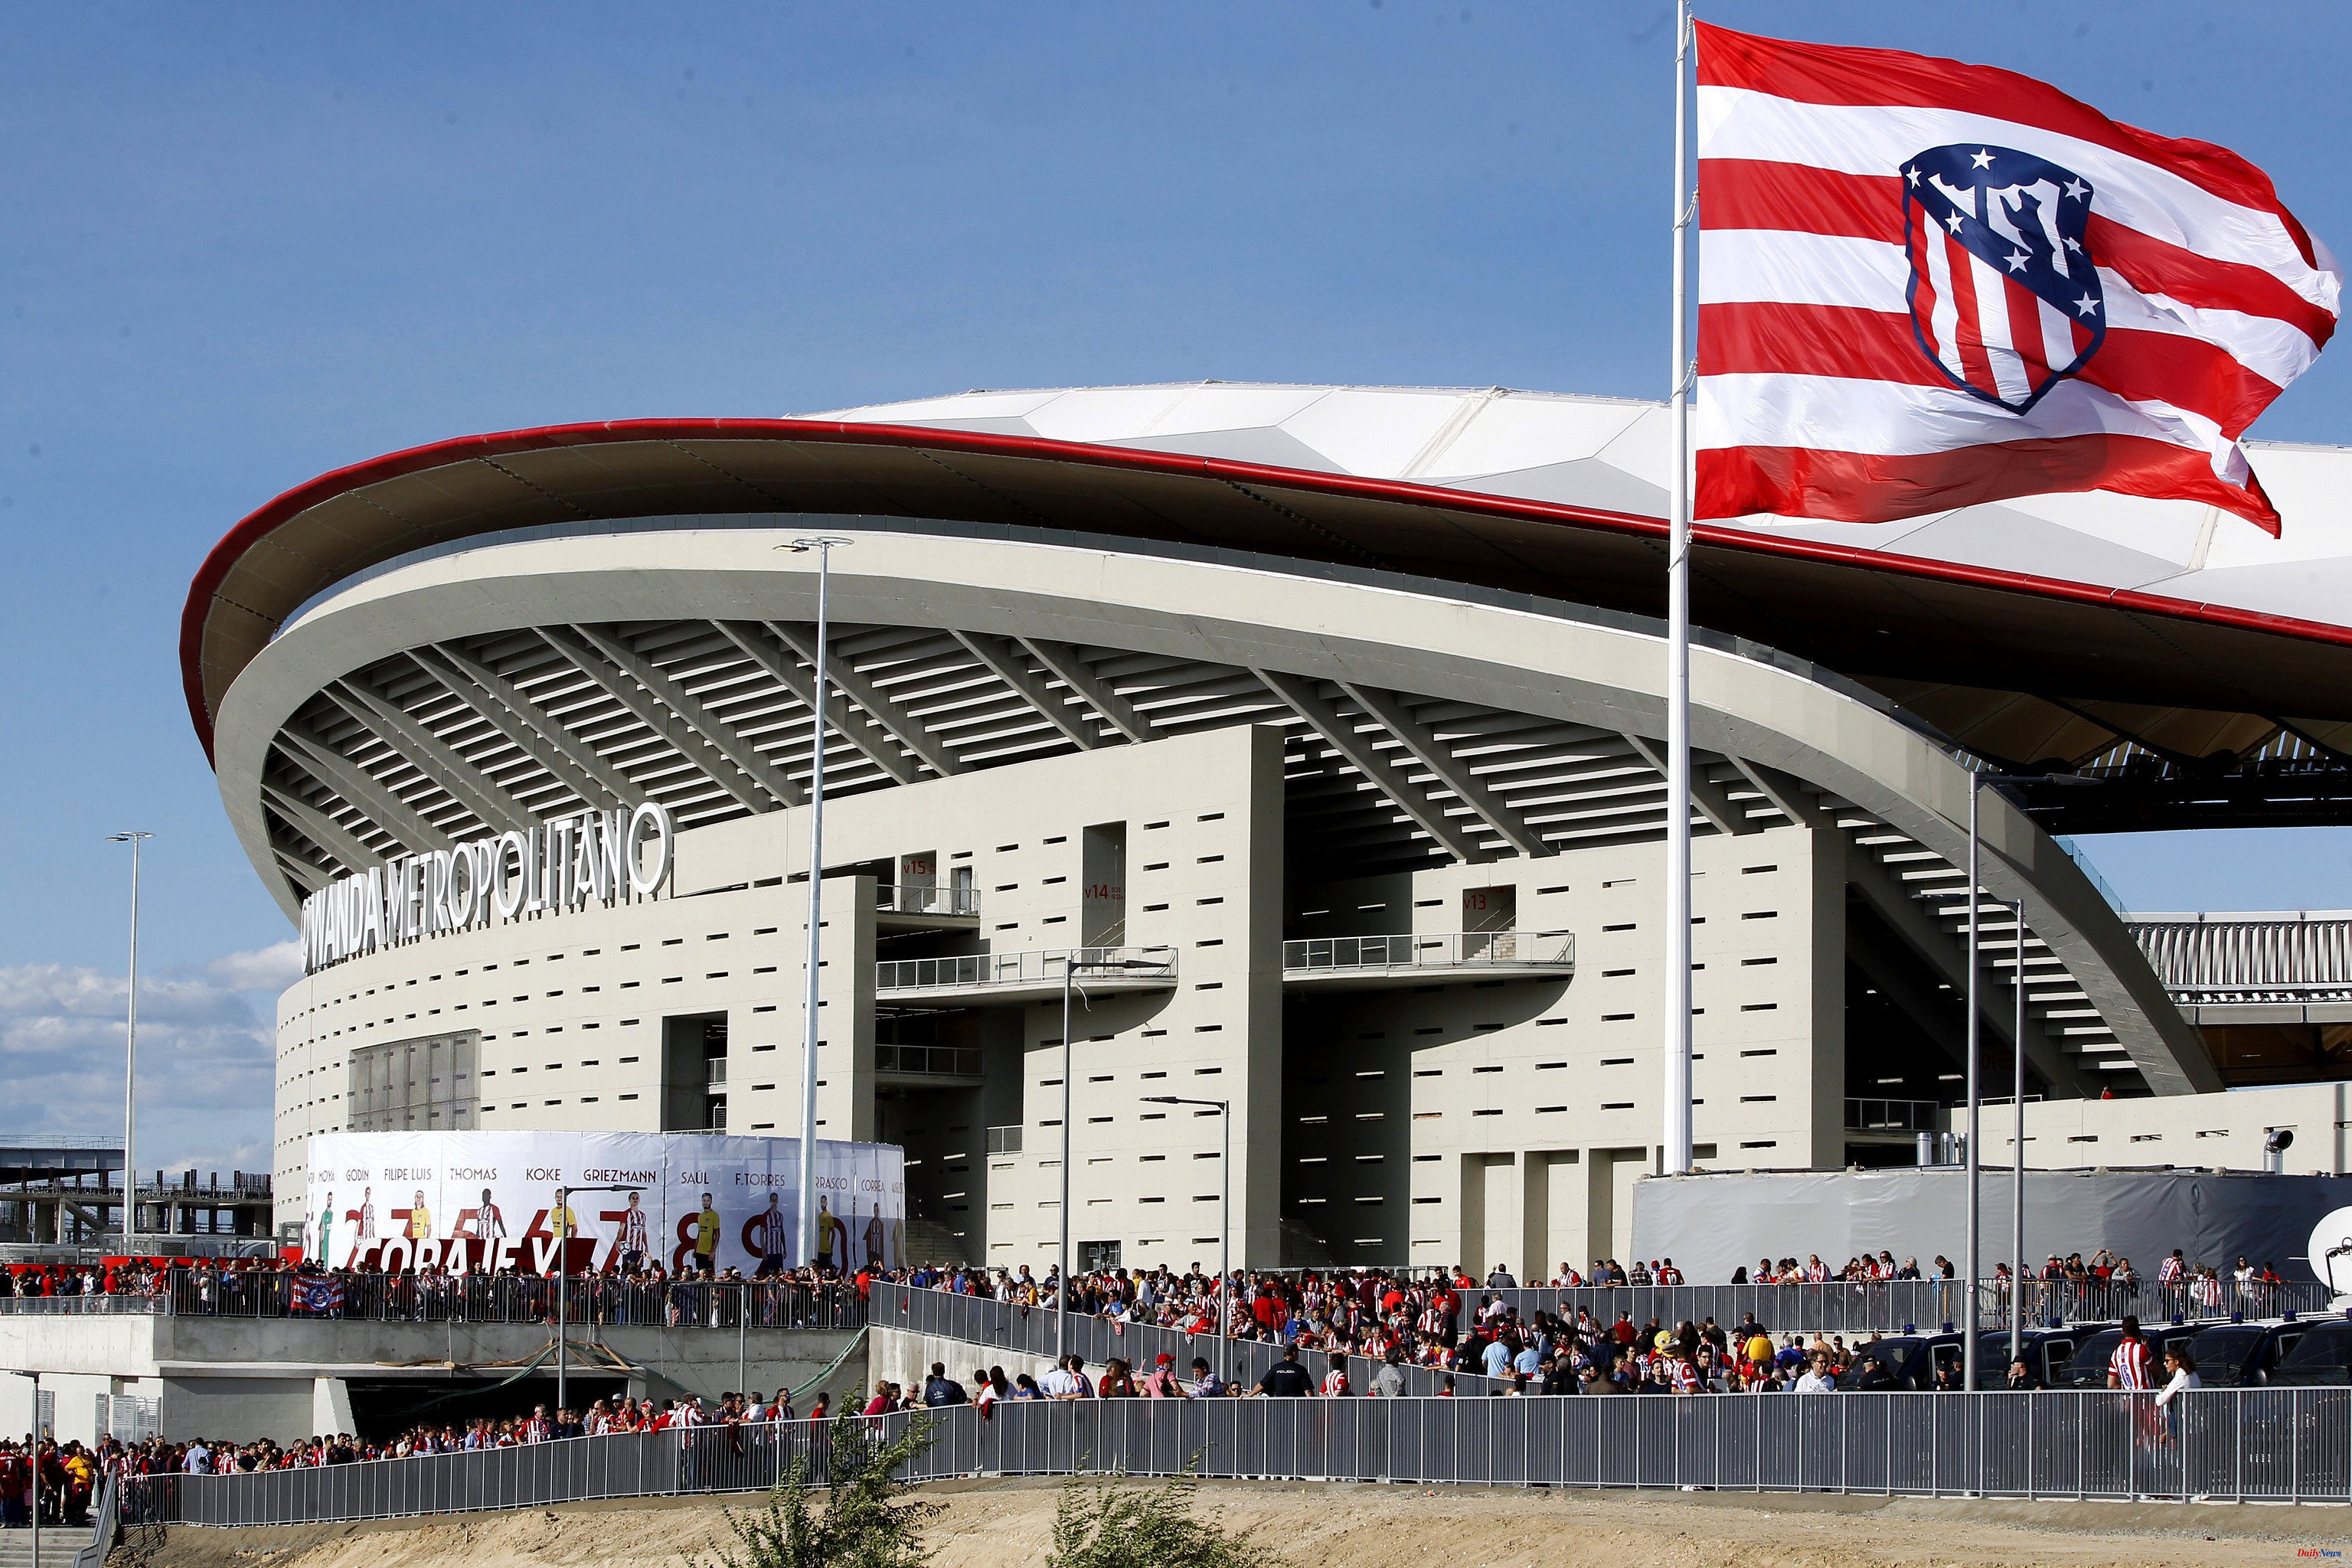 Sports Why are Atlético de Madrid fans called 'colchoneros' and 'indios'?